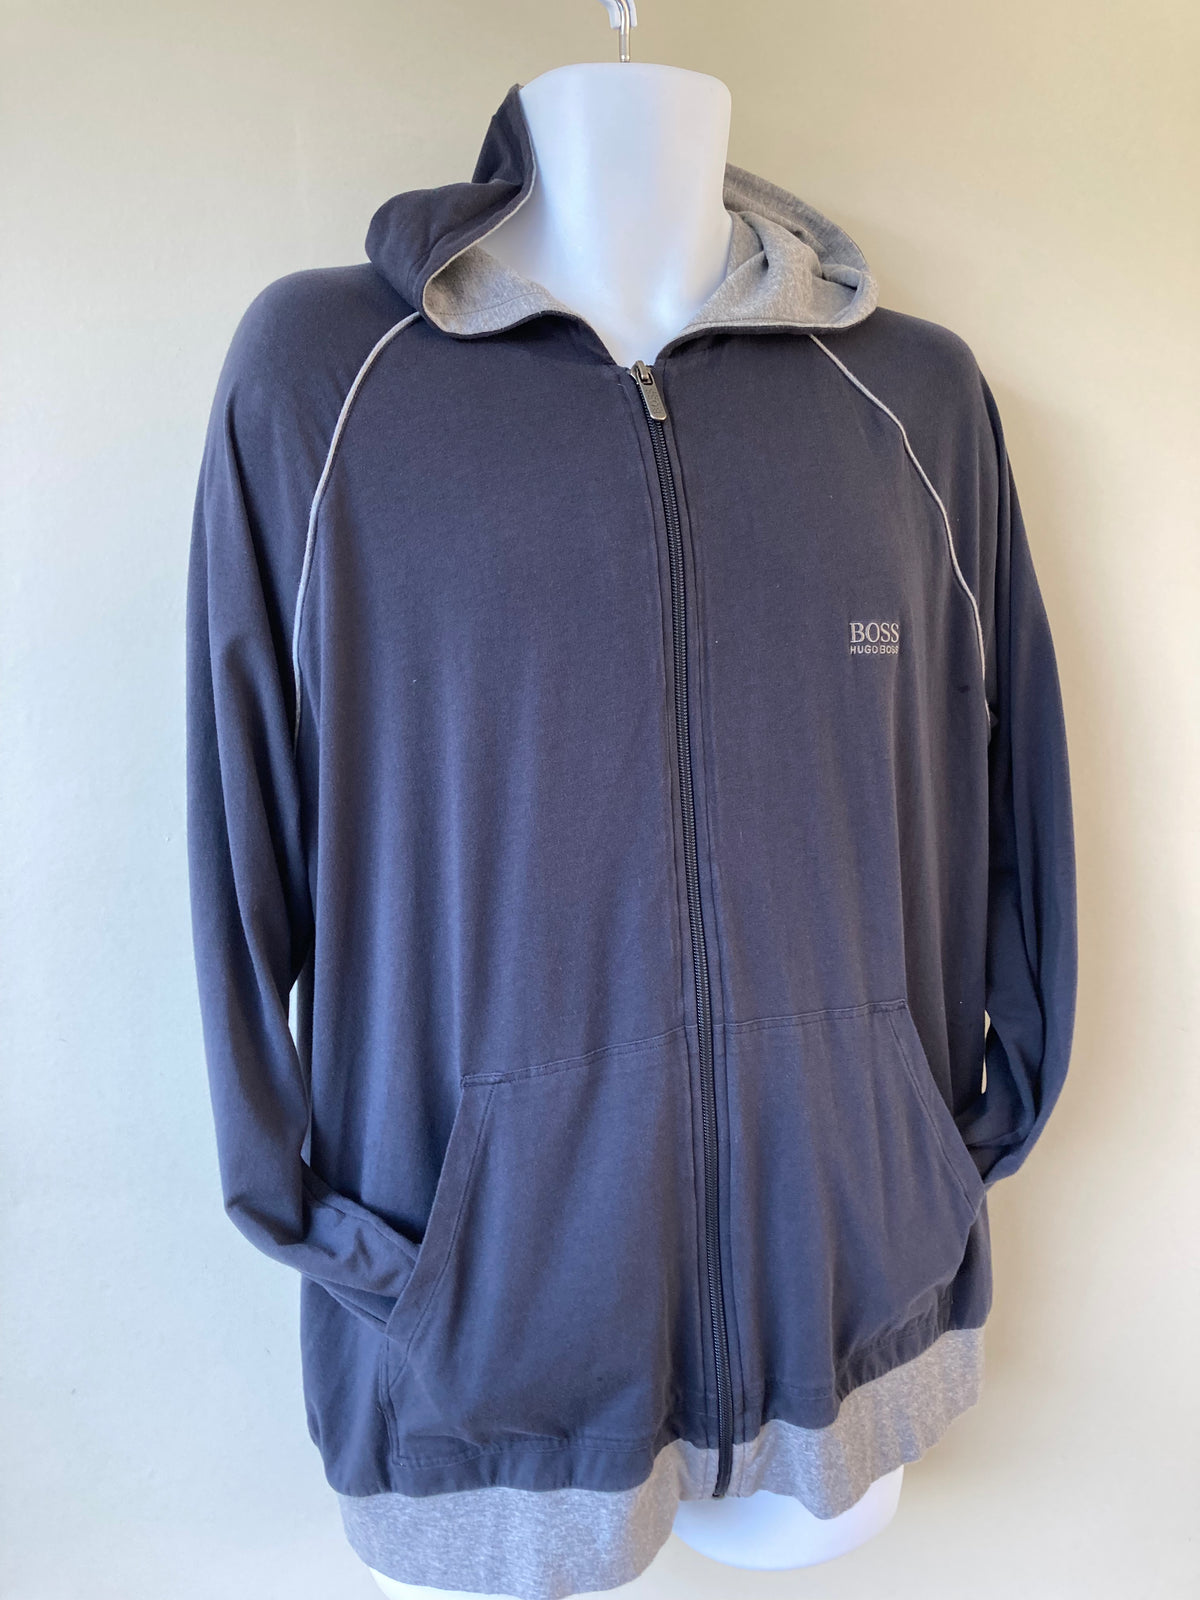 Stretch cotton hoodie by HUGO BOSS - size XL